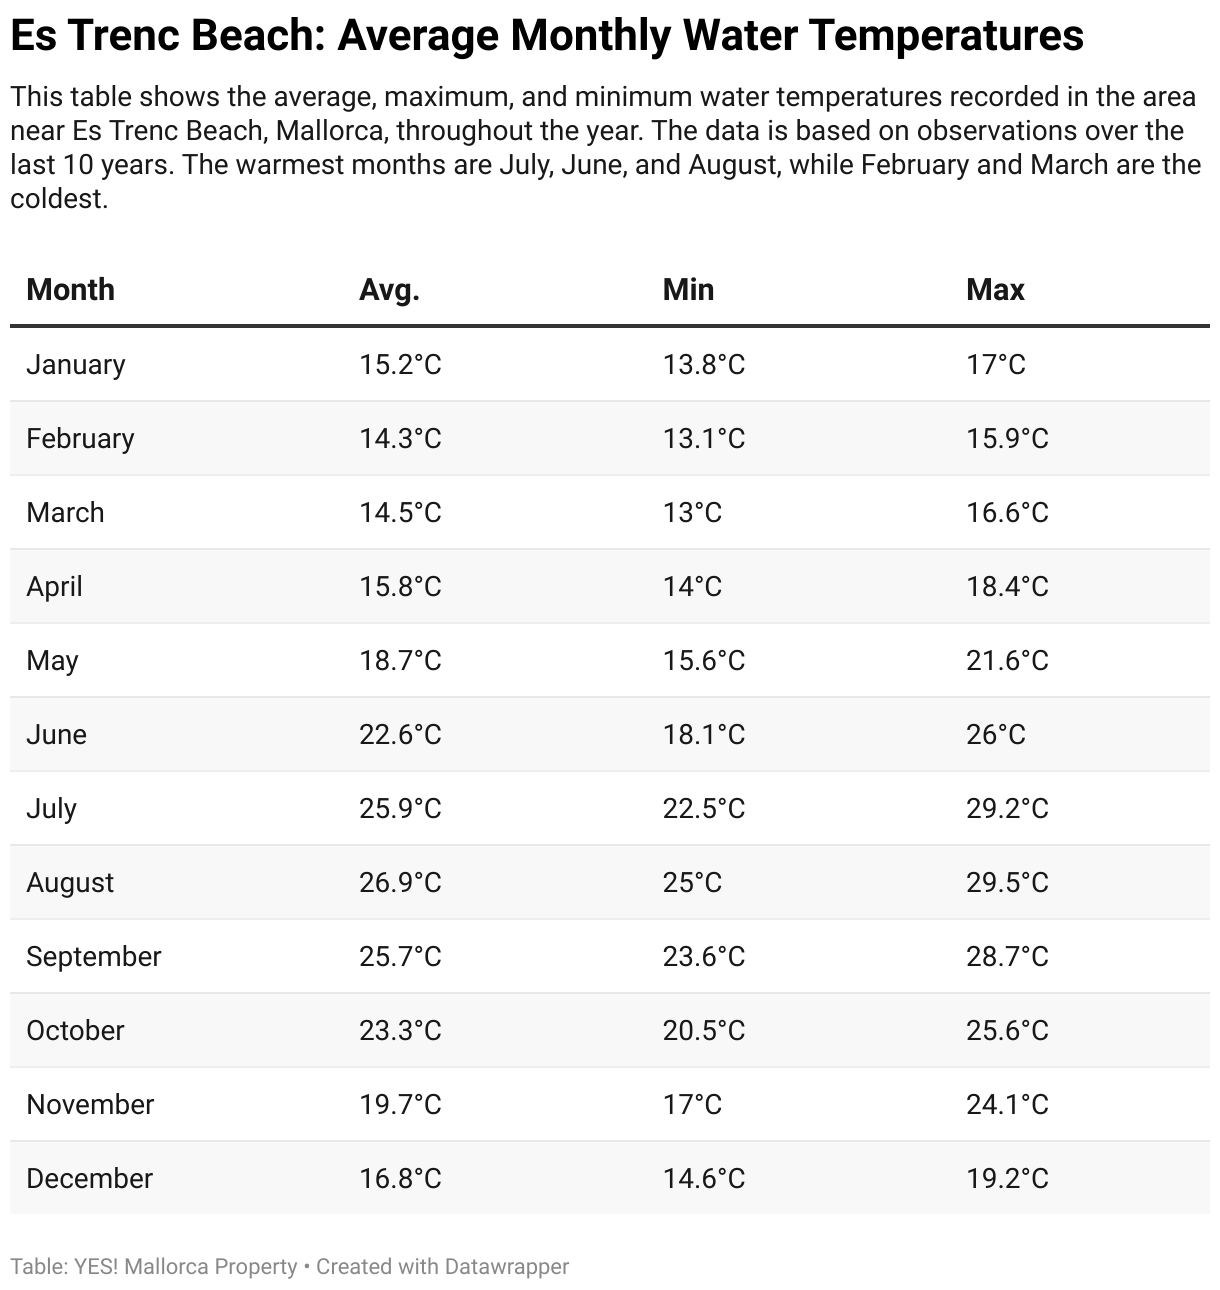 This table shows the average, maximum, and minimum water temperatures recorded in the area near Es Trenc Beach, Mallorca, throughout the year. The data is based on observations over the last 10 years. The warmest months are July, June, and August, while February and March are the coldest.